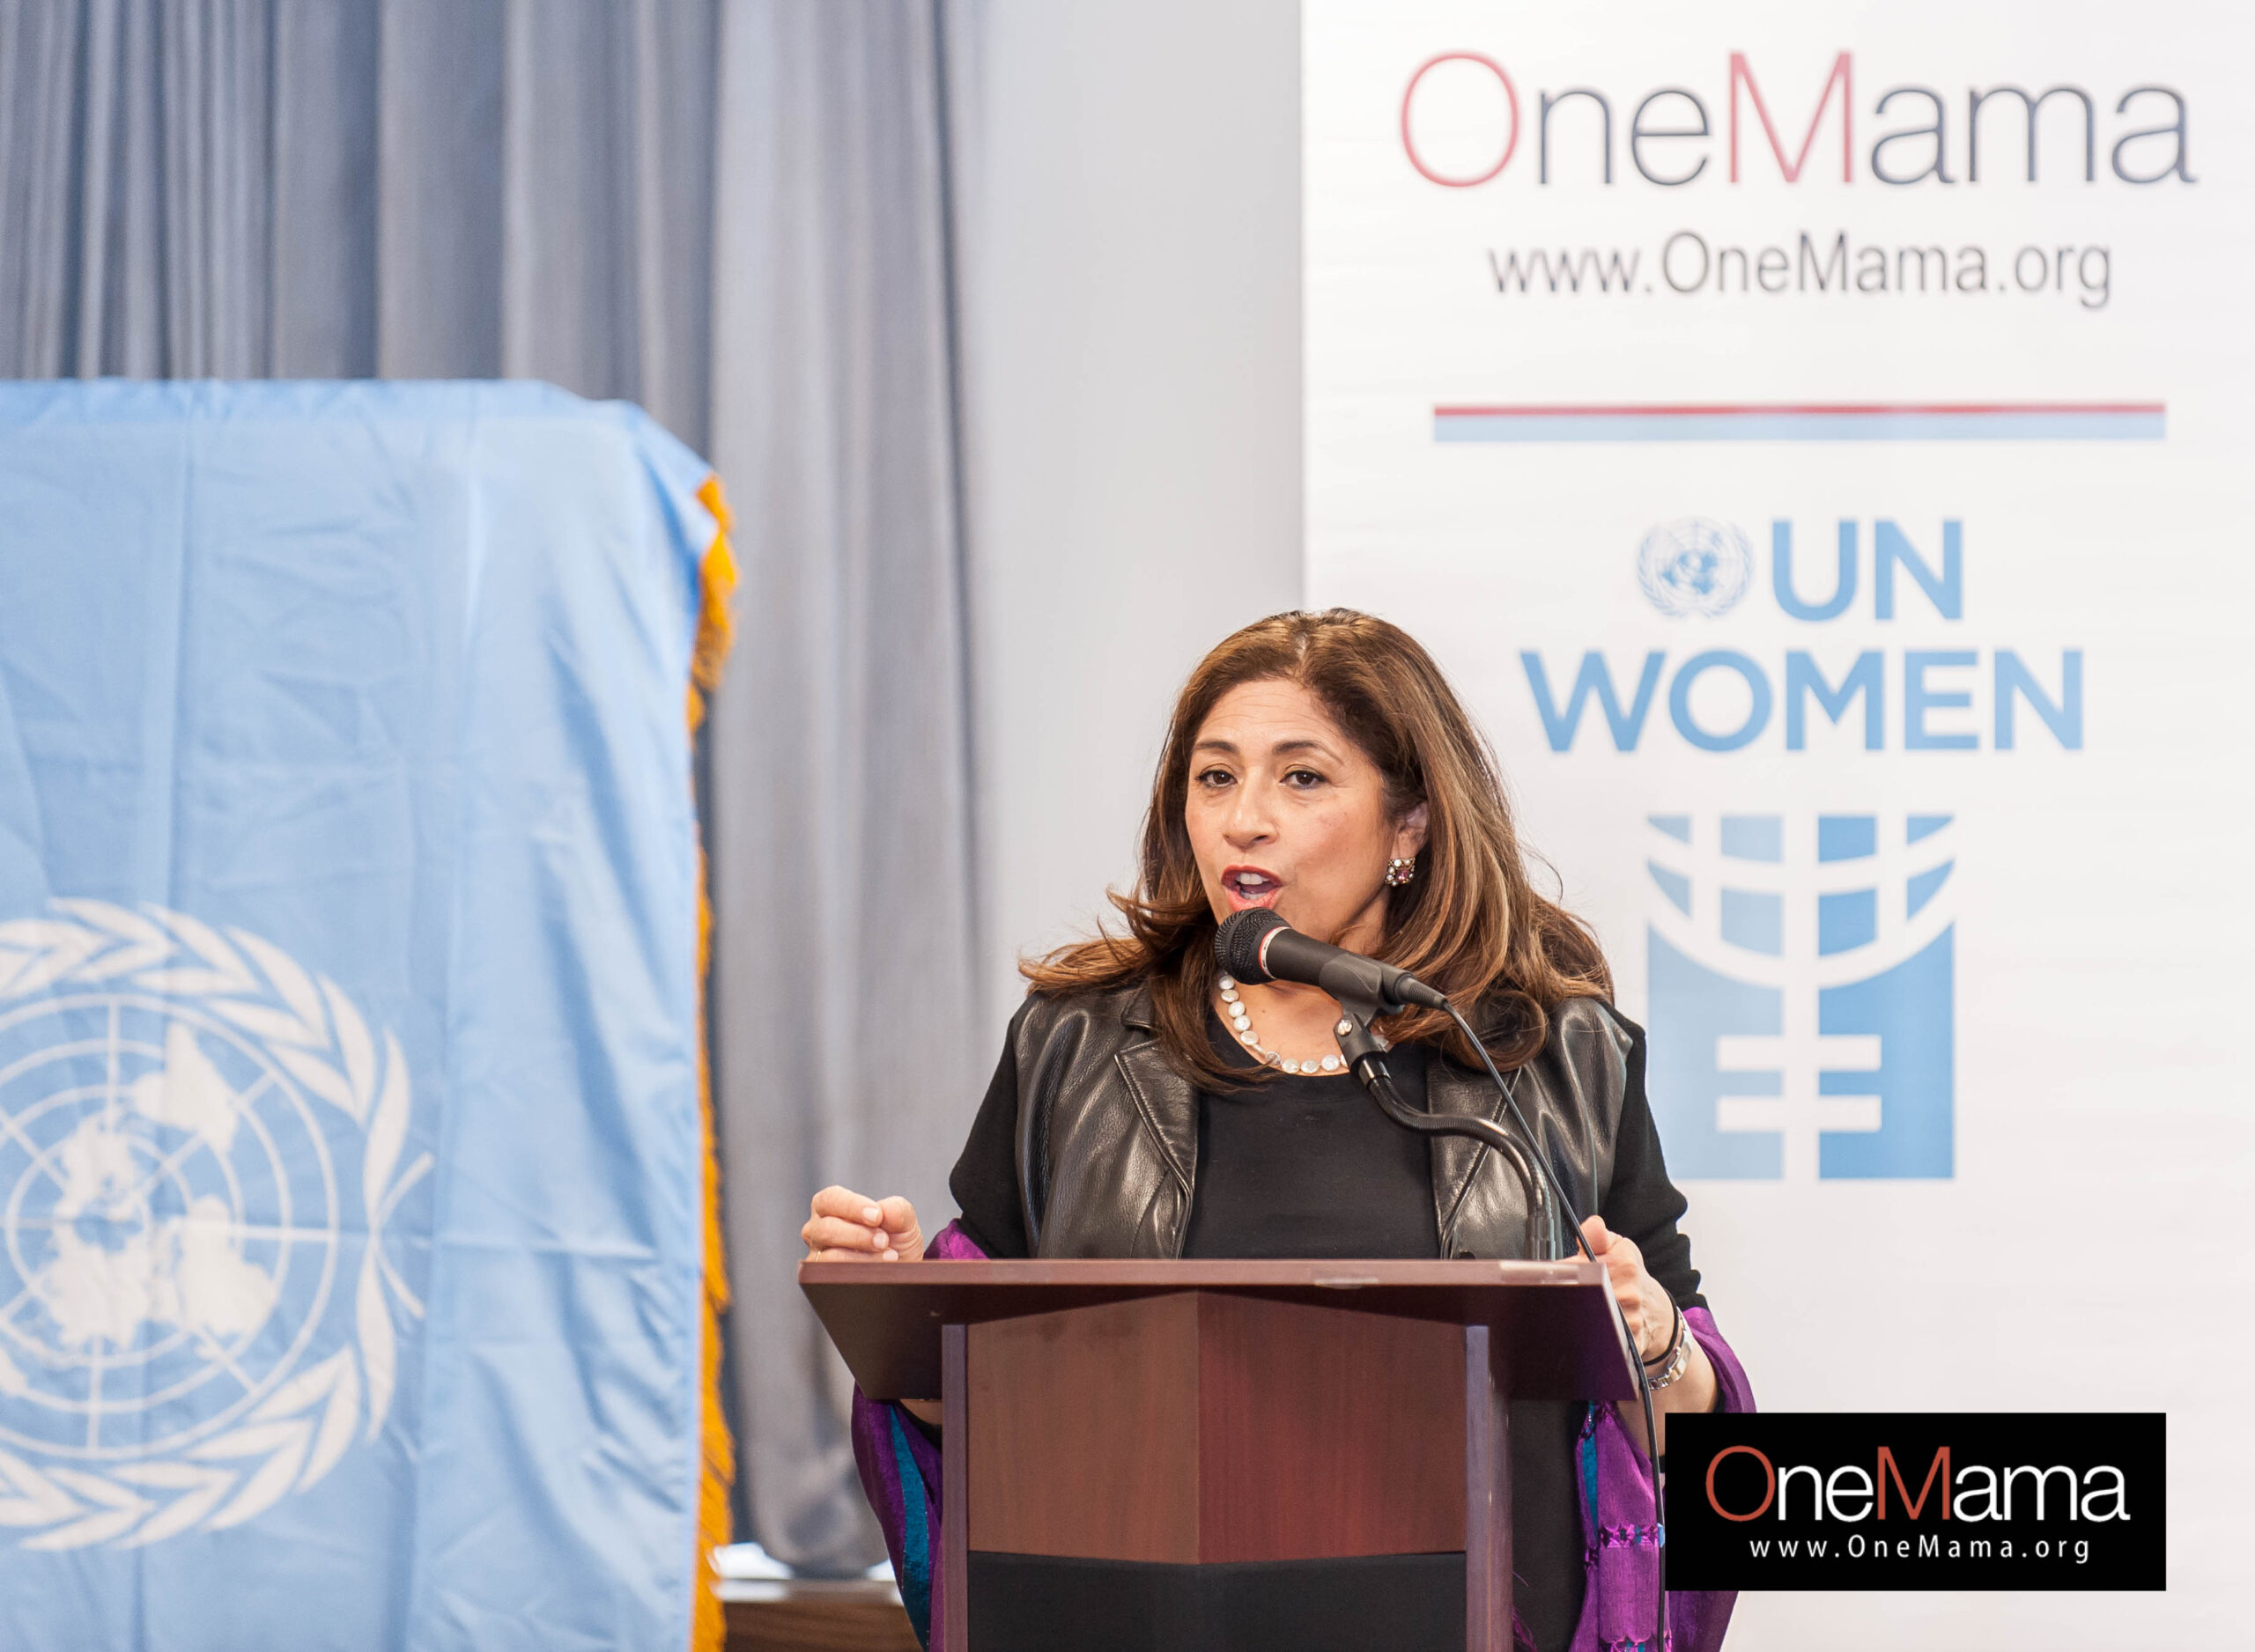 Delegate to UN discusses OneMama community Issues and action Items